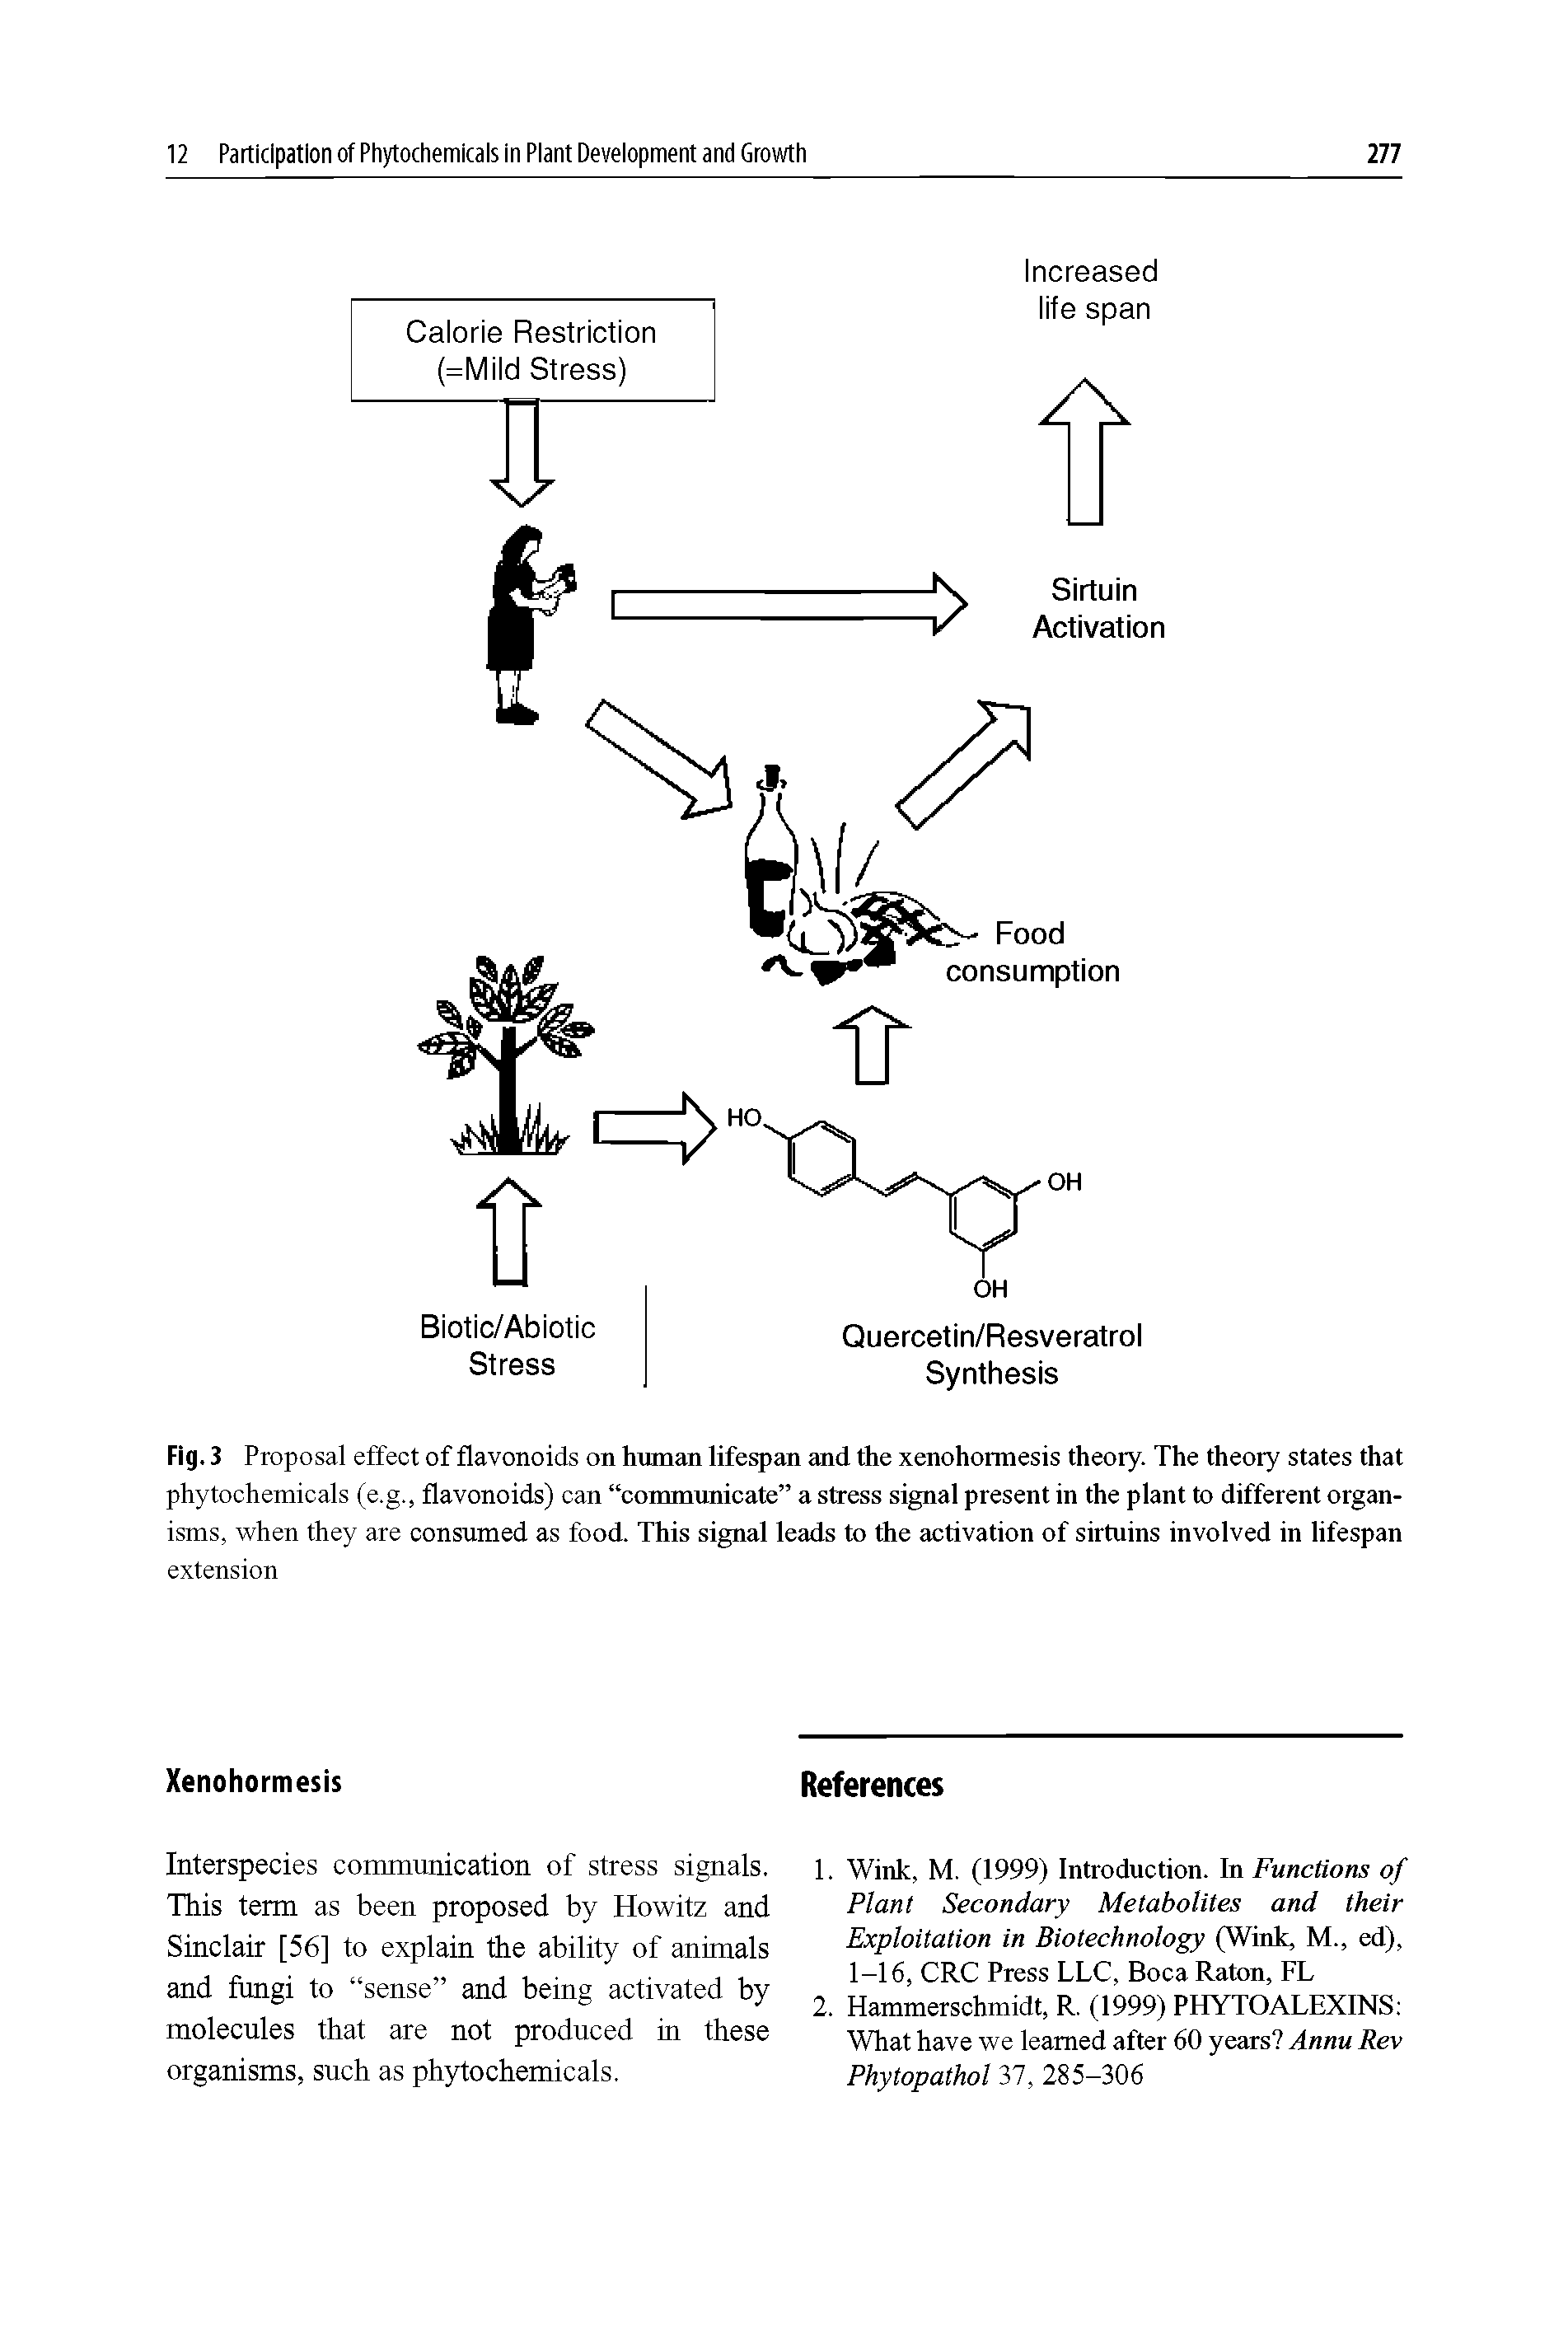 Fig. 3 Proposal effect of flavonoids on human lifespan and the xenohormesis theory. The theory states that phytochemicals (e.g., flavonoids) can communicate a stress signal present in the plant to different organisms, when they are consumed as foocL This signal leads to the activation of sirtuins involved in lifespan...